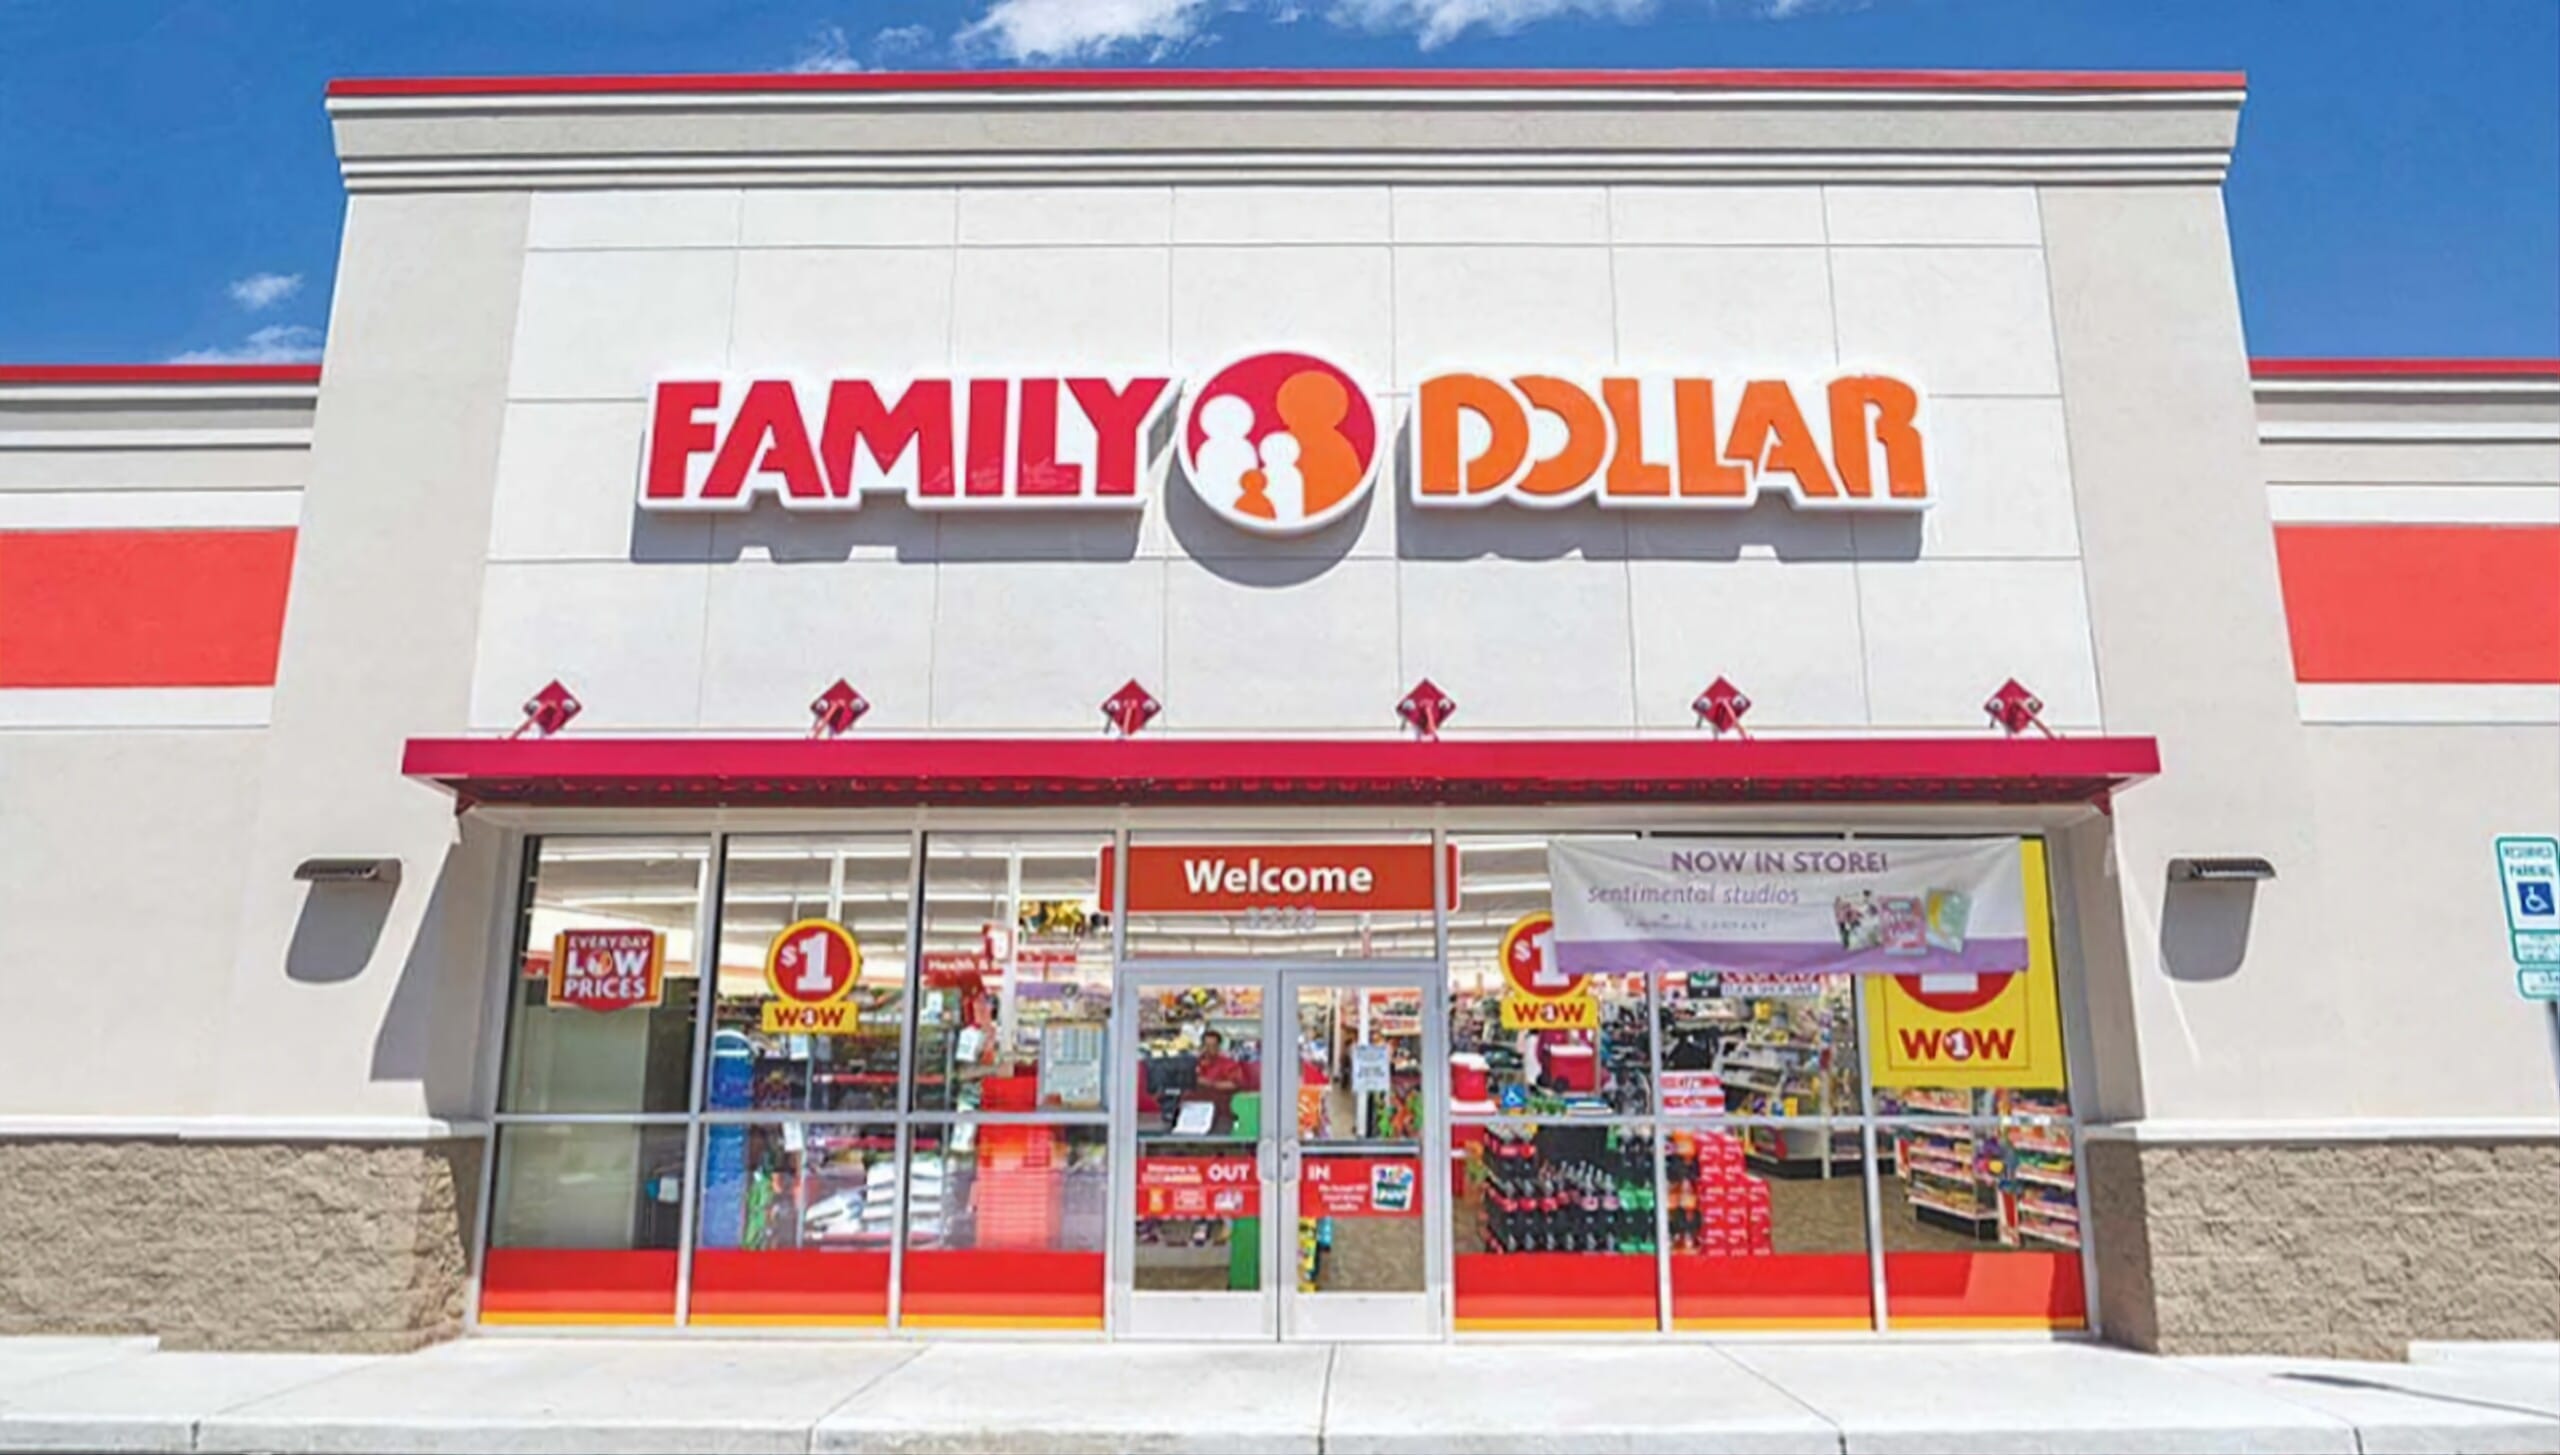 Family Dollar offers these cheap, good quality products